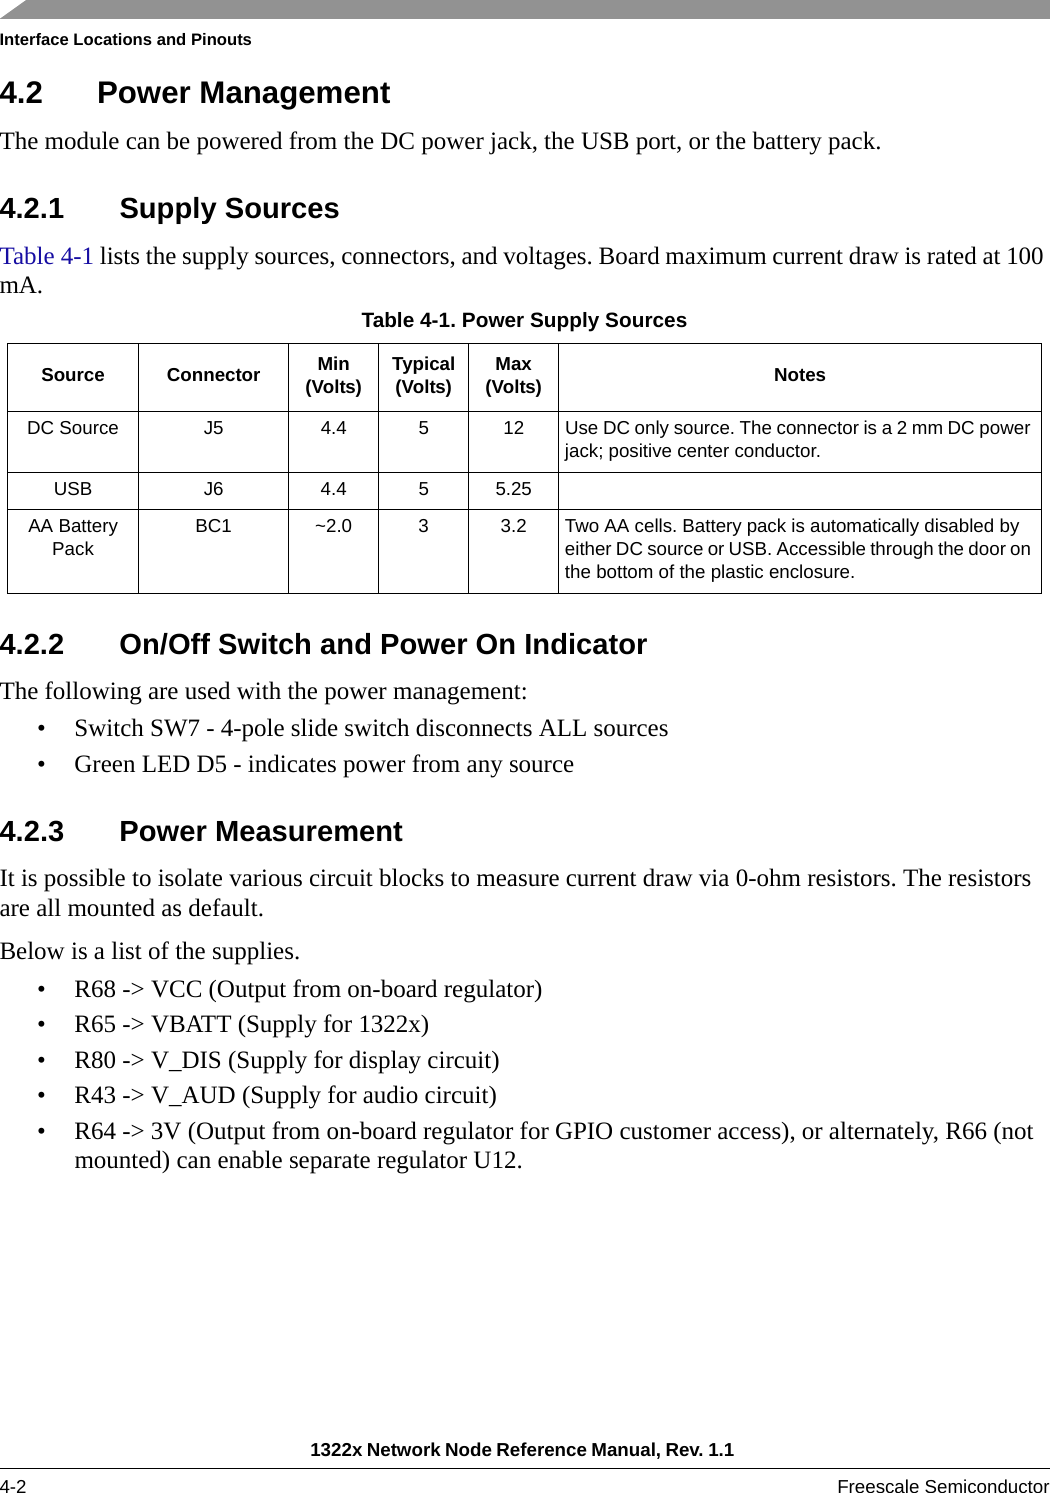 Interface Locations and Pinouts1322x Network Node Reference Manual, Rev. 1.1 4-2 Freescale Semiconductor4.2 Power ManagementThe module can be powered from the DC power jack, the USB port, or the battery pack.4.2.1 Supply SourcesTable 4-1 lists the supply sources, connectors, and voltages. Board maximum current draw is rated at 100 mA.Table 4-1. Power Supply Sources4.2.2 On/Off Switch and Power On IndicatorThe following are used with the power management:• Switch SW7 - 4-pole slide switch disconnects ALL sources• Green LED D5 - indicates power from any source4.2.3 Power MeasurementIt is possible to isolate various circuit blocks to measure current draw via 0-ohm resistors. The resistors are all mounted as default.Below is a list of the supplies.• R68 -&gt; VCC (Output from on-board regulator)• R65 -&gt; VBATT (Supply for 1322x)• R80 -&gt; V_DIS (Supply for display circuit)• R43 -&gt; V_AUD (Supply for audio circuit)• R64 -&gt; 3V (Output from on-board regulator for GPIO customer access), or alternately, R66 (not mounted) can enable separate regulator U12.Source Connector Min(Volts) Typical(Volts) Max(Volts) NotesDC Source J5 4.4 5 12 Use DC only source. The connector is a 2 mm DC power jack; positive center conductor.USB J6 4.4 5 5.25AA Battery PackBC1 ~2.0 3 3.2 Two AA cells. Battery pack is automatically disabled by either DC source or USB. Accessible through the door on the bottom of the plastic enclosure.